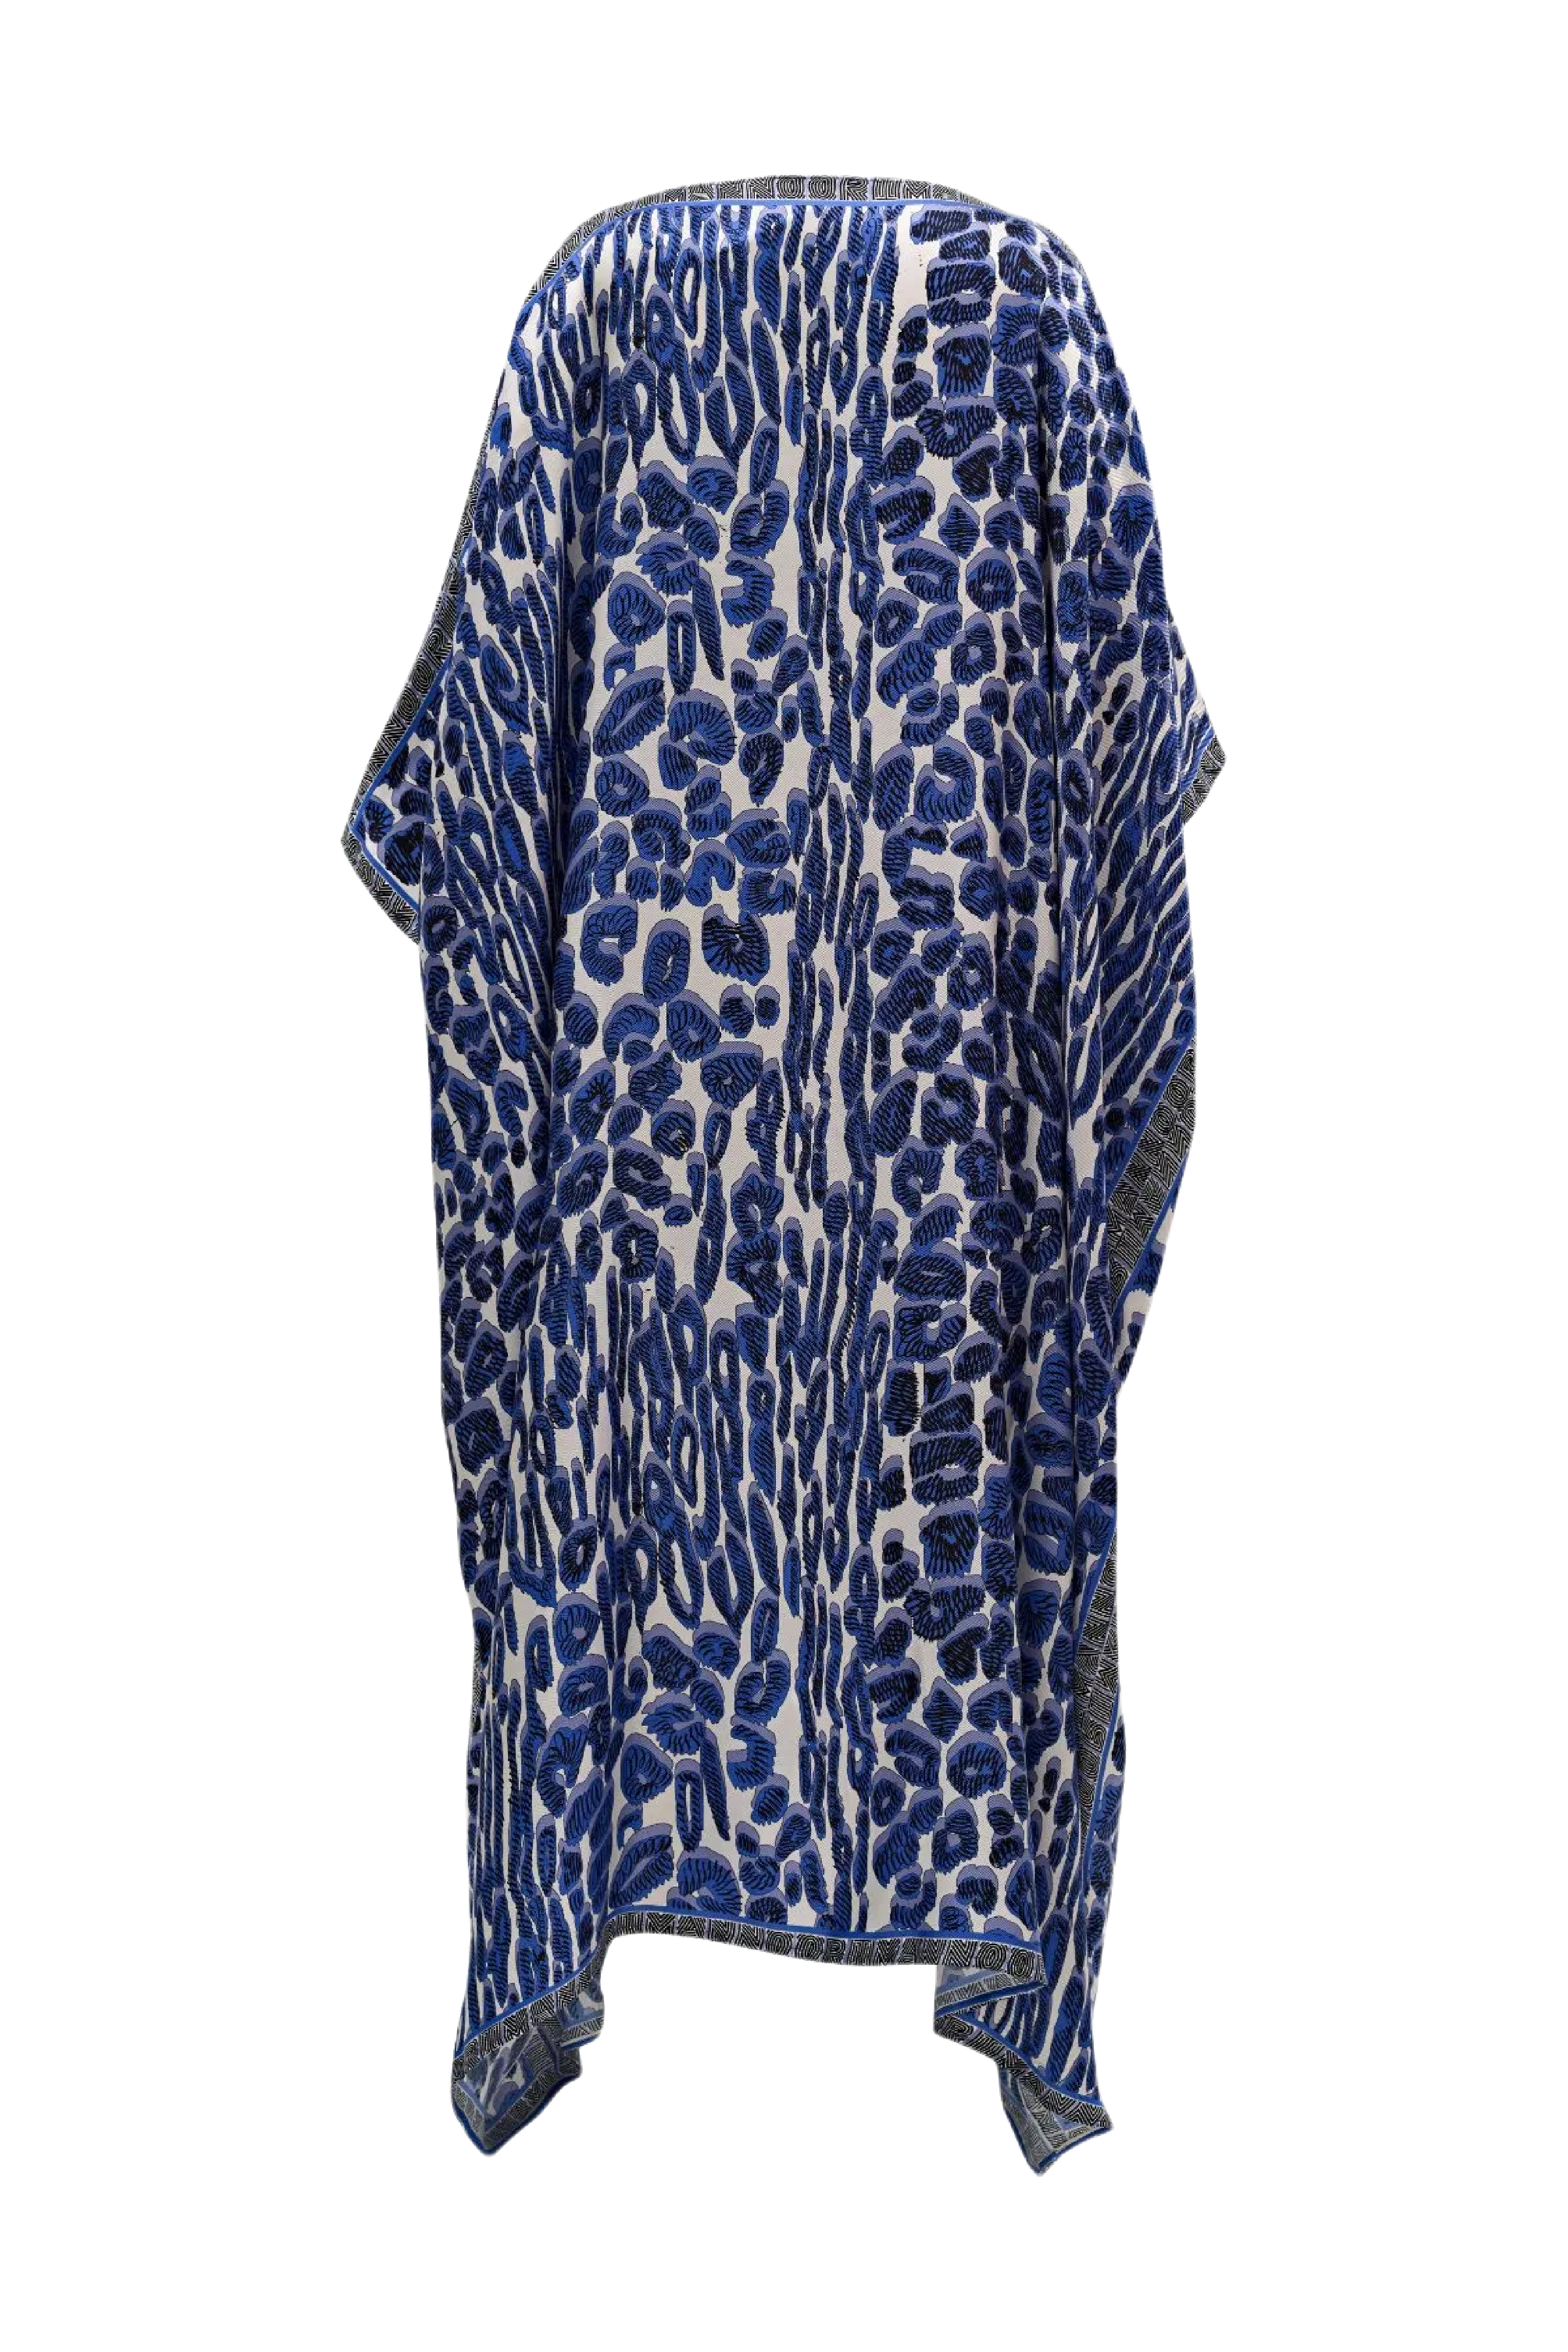 Leopard of the East Caftan